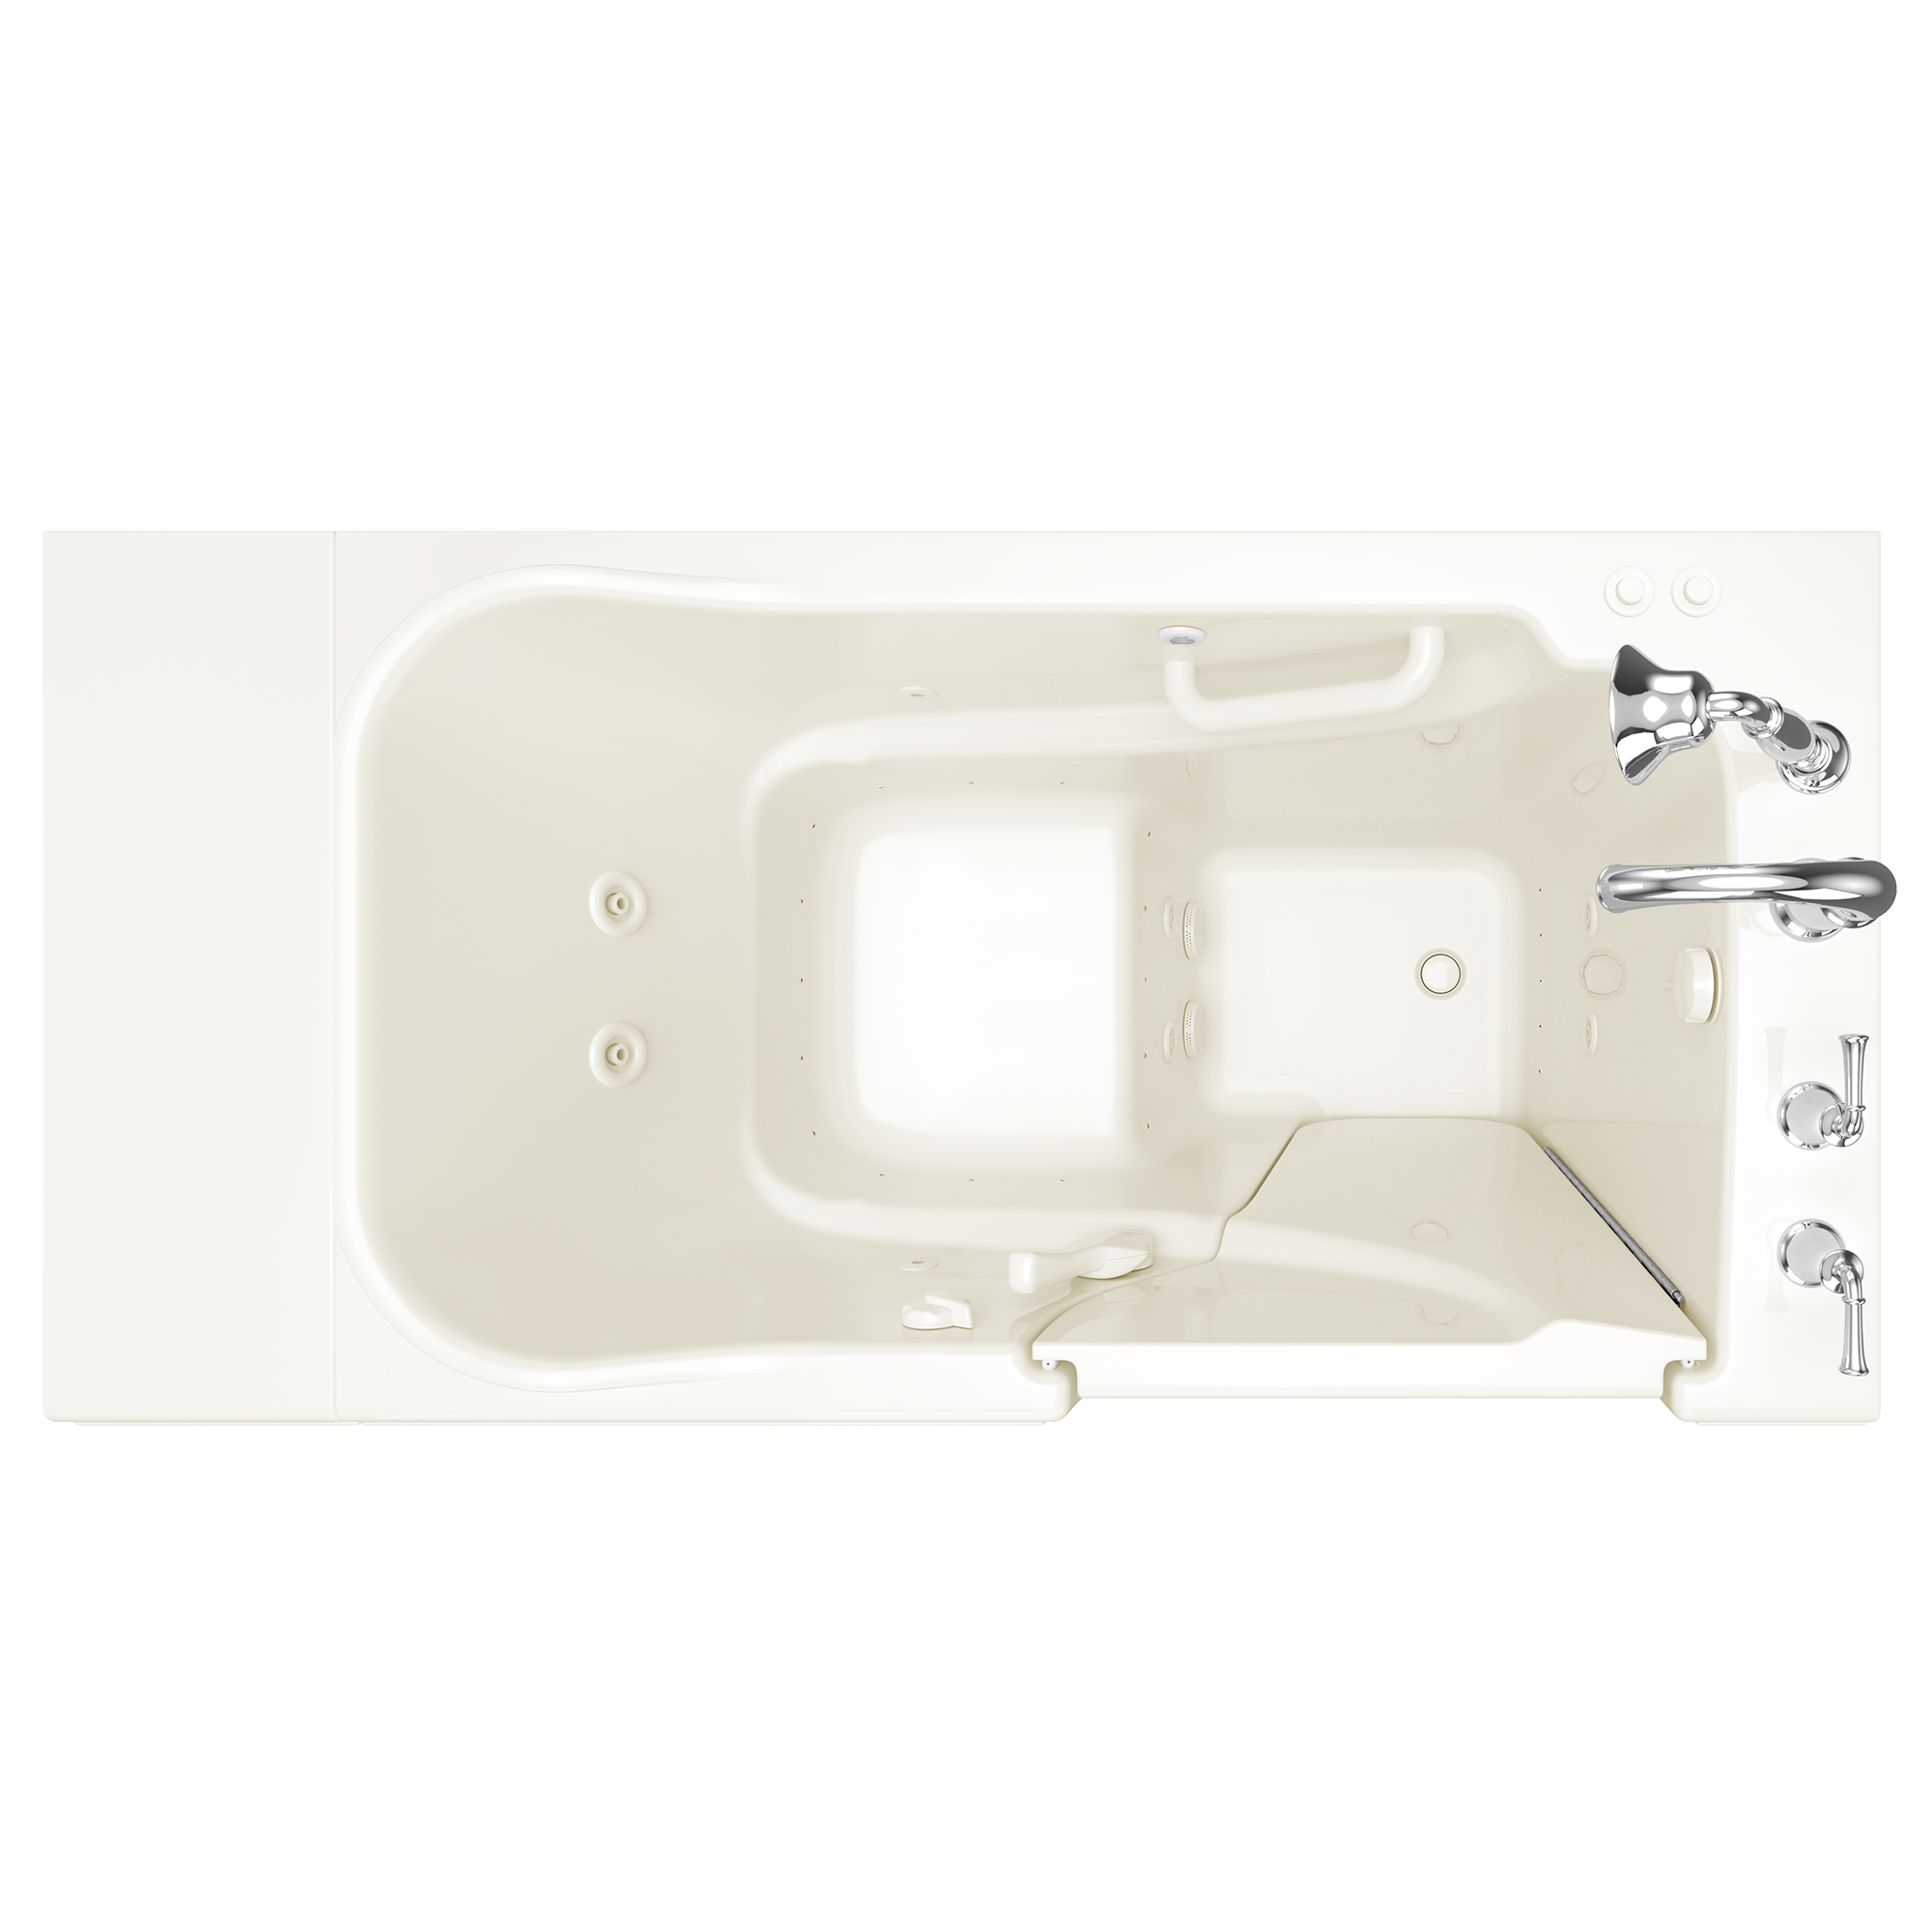 Gelcoat Value Series 30x52 Inch Walk-In Bathtub with Combination Air Spa system and Whirlpool Massage System - Left Hand Door and Drain